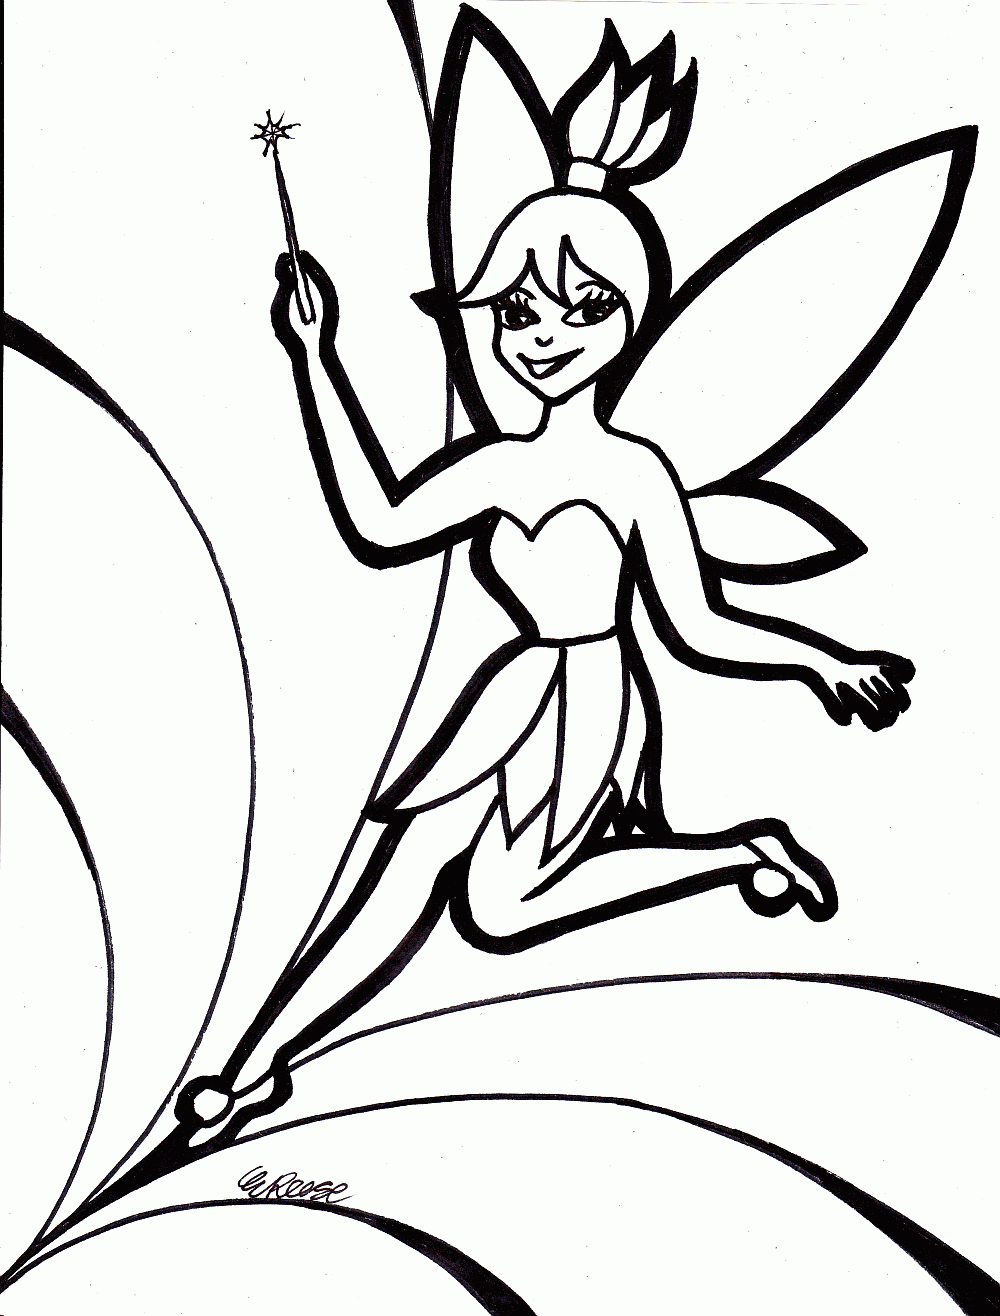 tinkerbell flying coloring pages